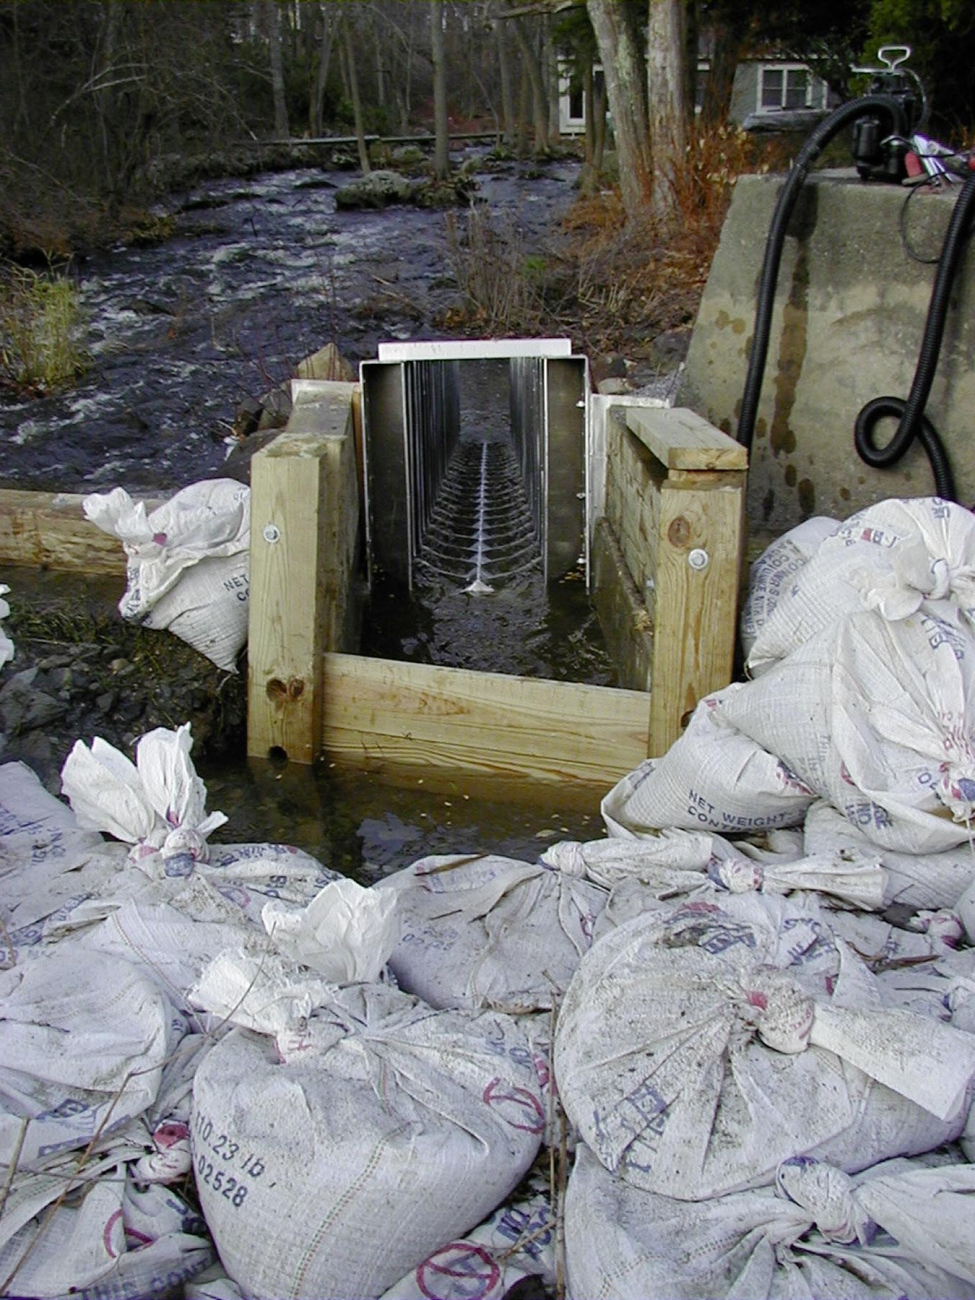 Sand bags hold back water flow while the fishway is installed